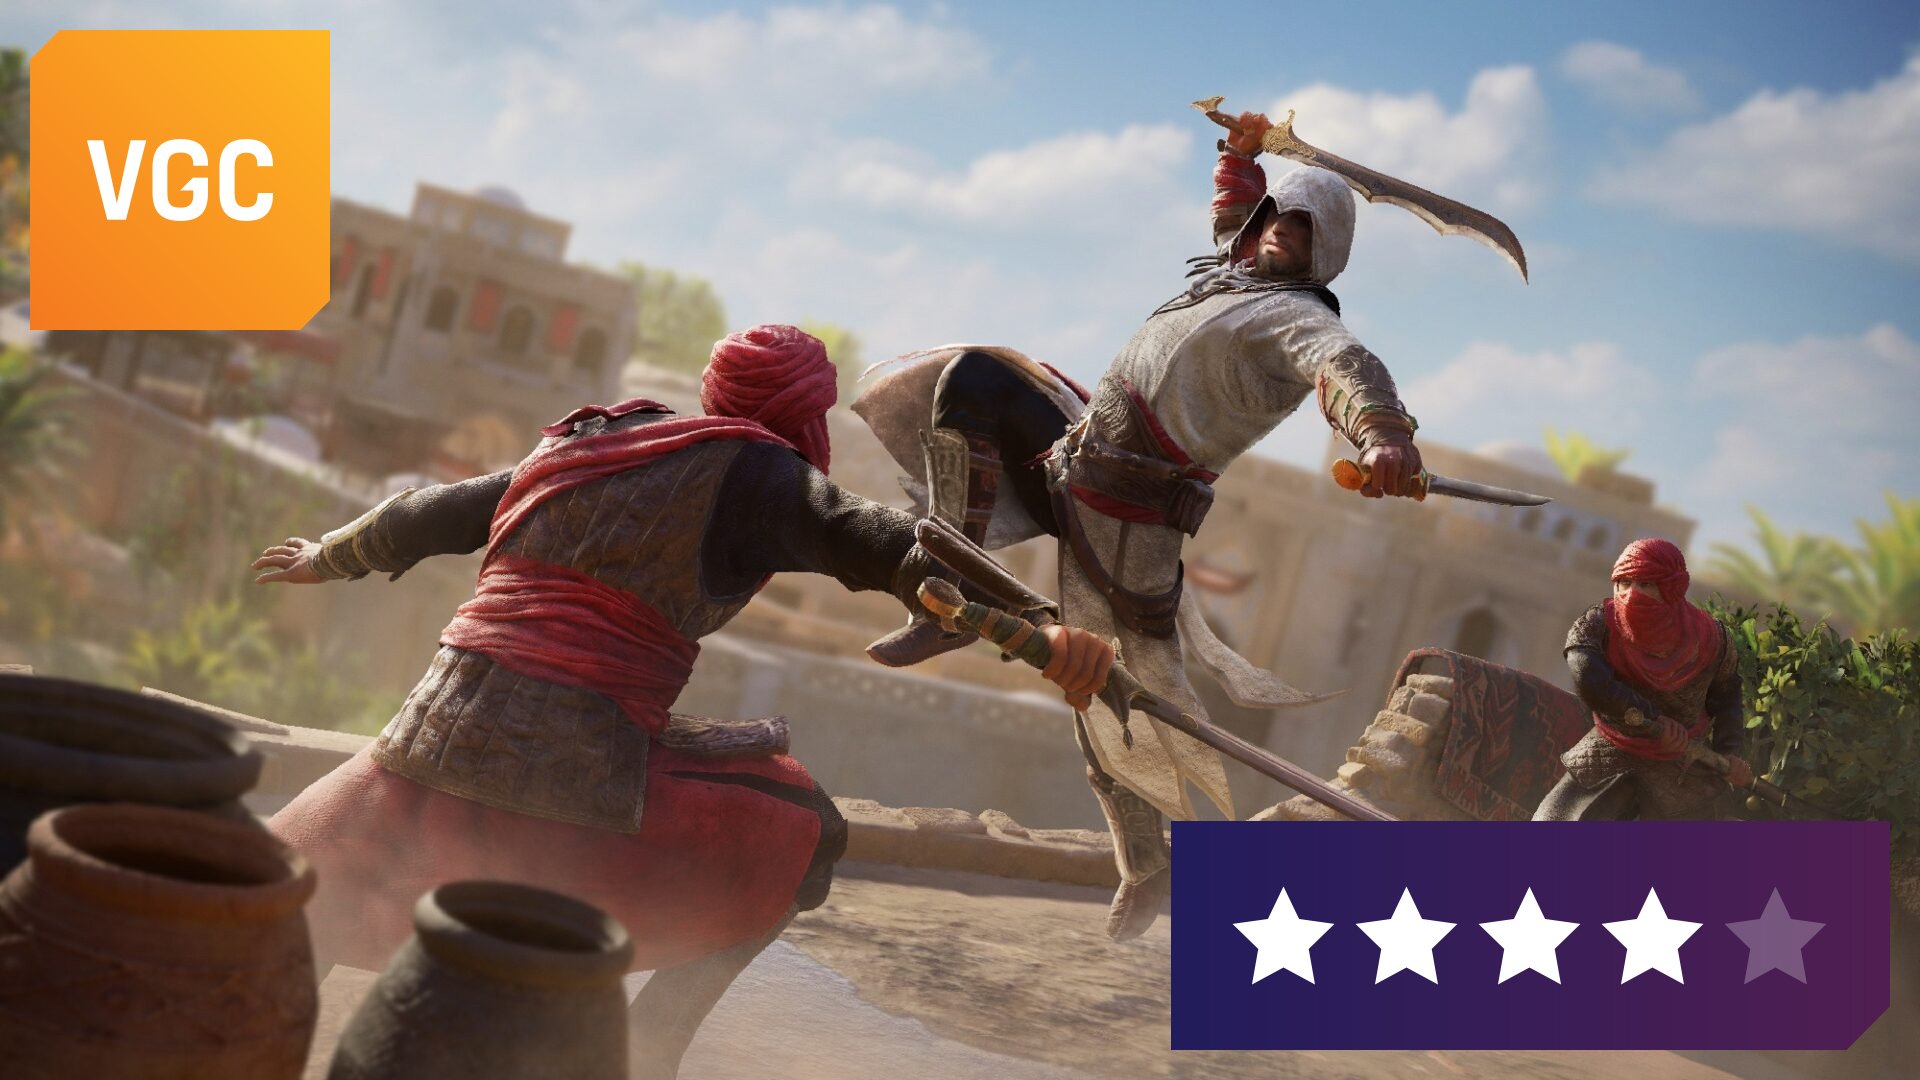 Assassin's Creed: Mirage - Playstation 5 : Target